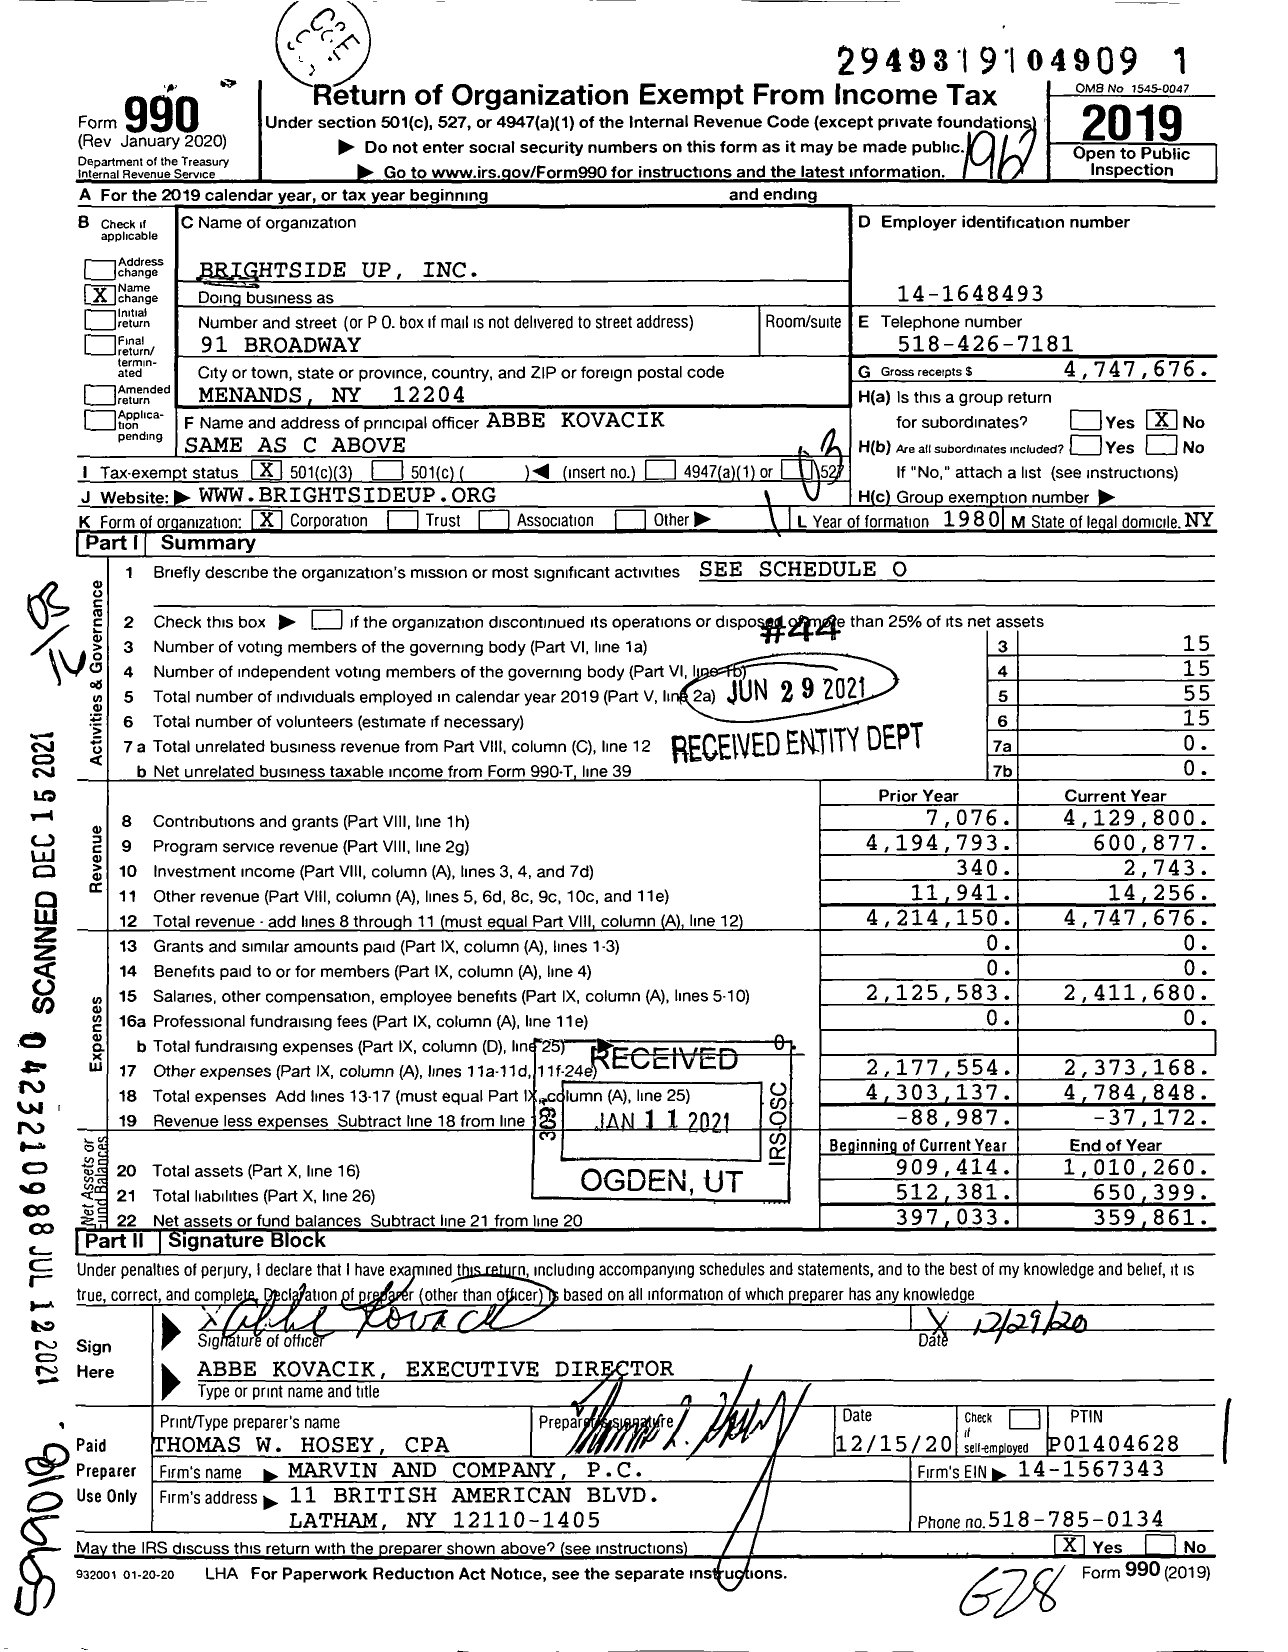 Image of first page of 2019 Form 990 for Brightside Up